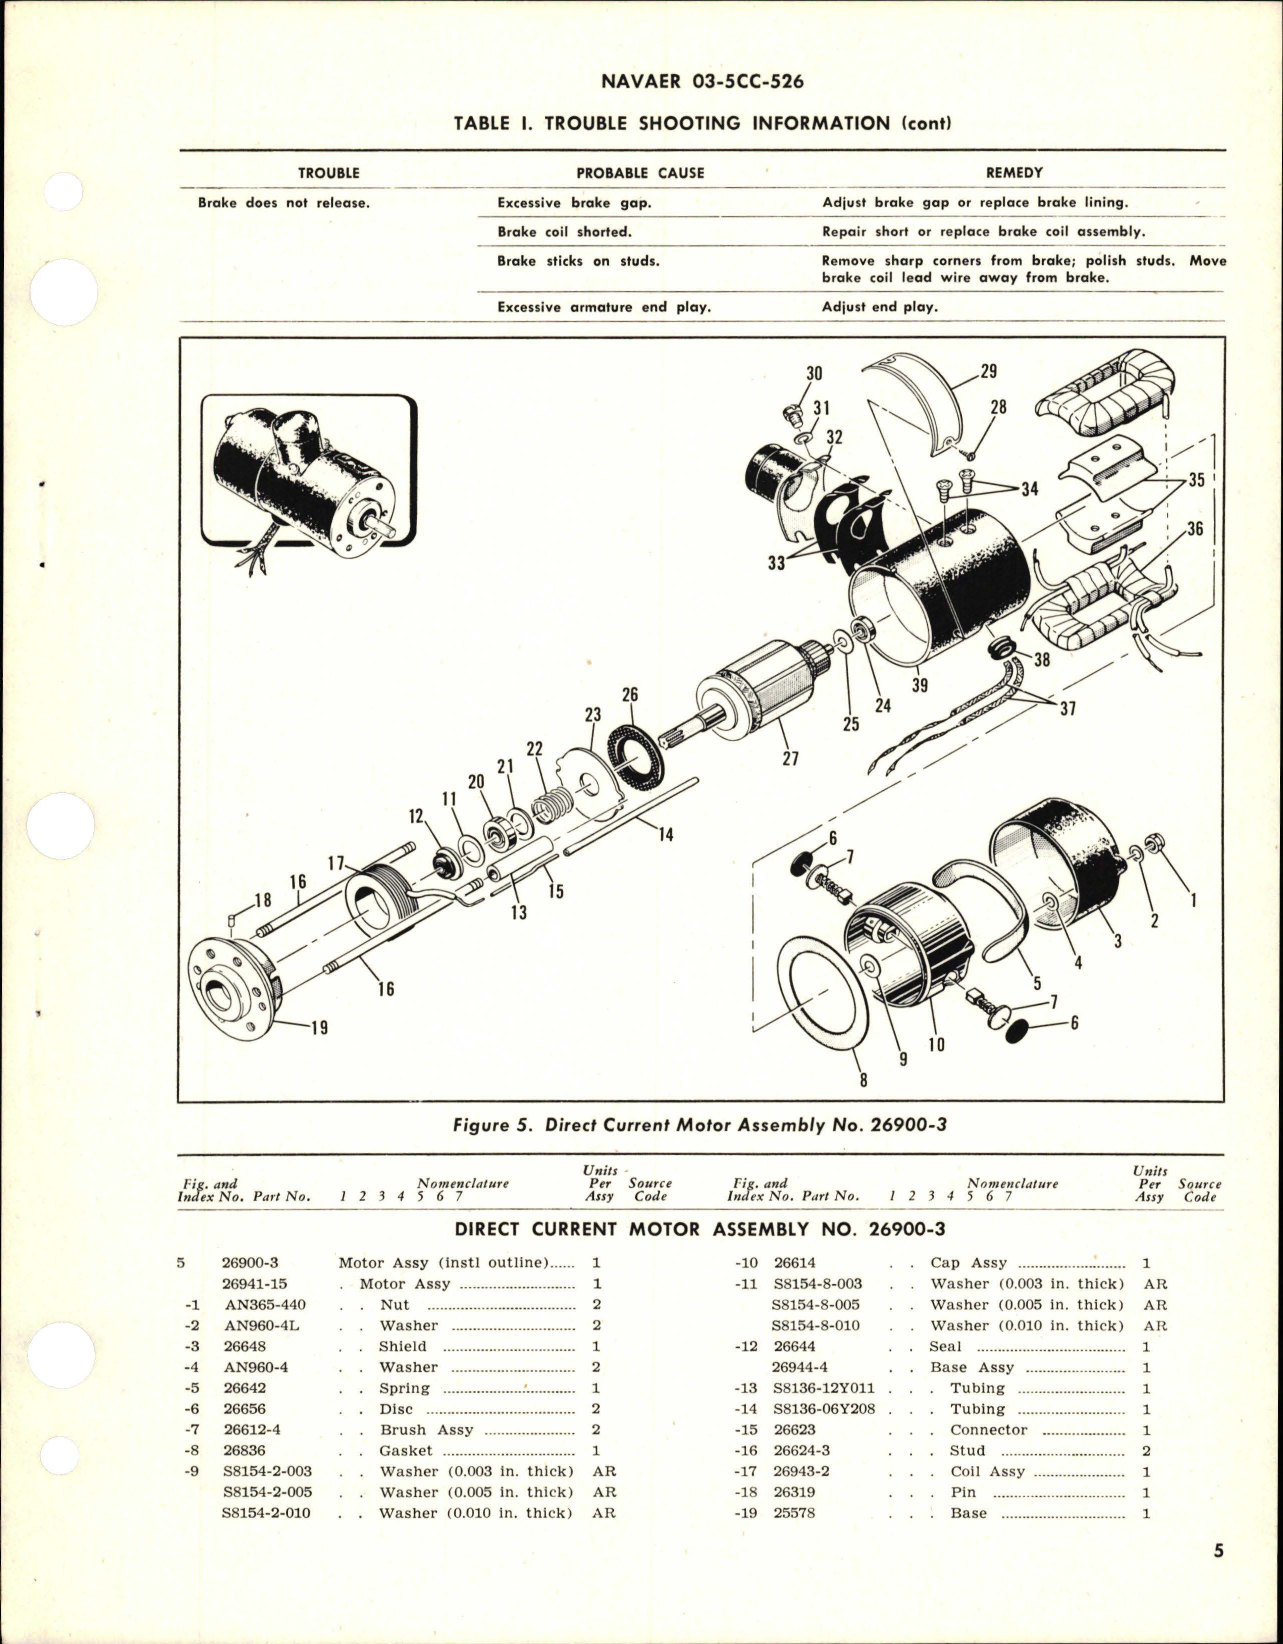 Sample page 5 from AirCorps Library document: Overhaul Instructions with Parts Breakdown for Direct Current Motor Assembly - 2690-3